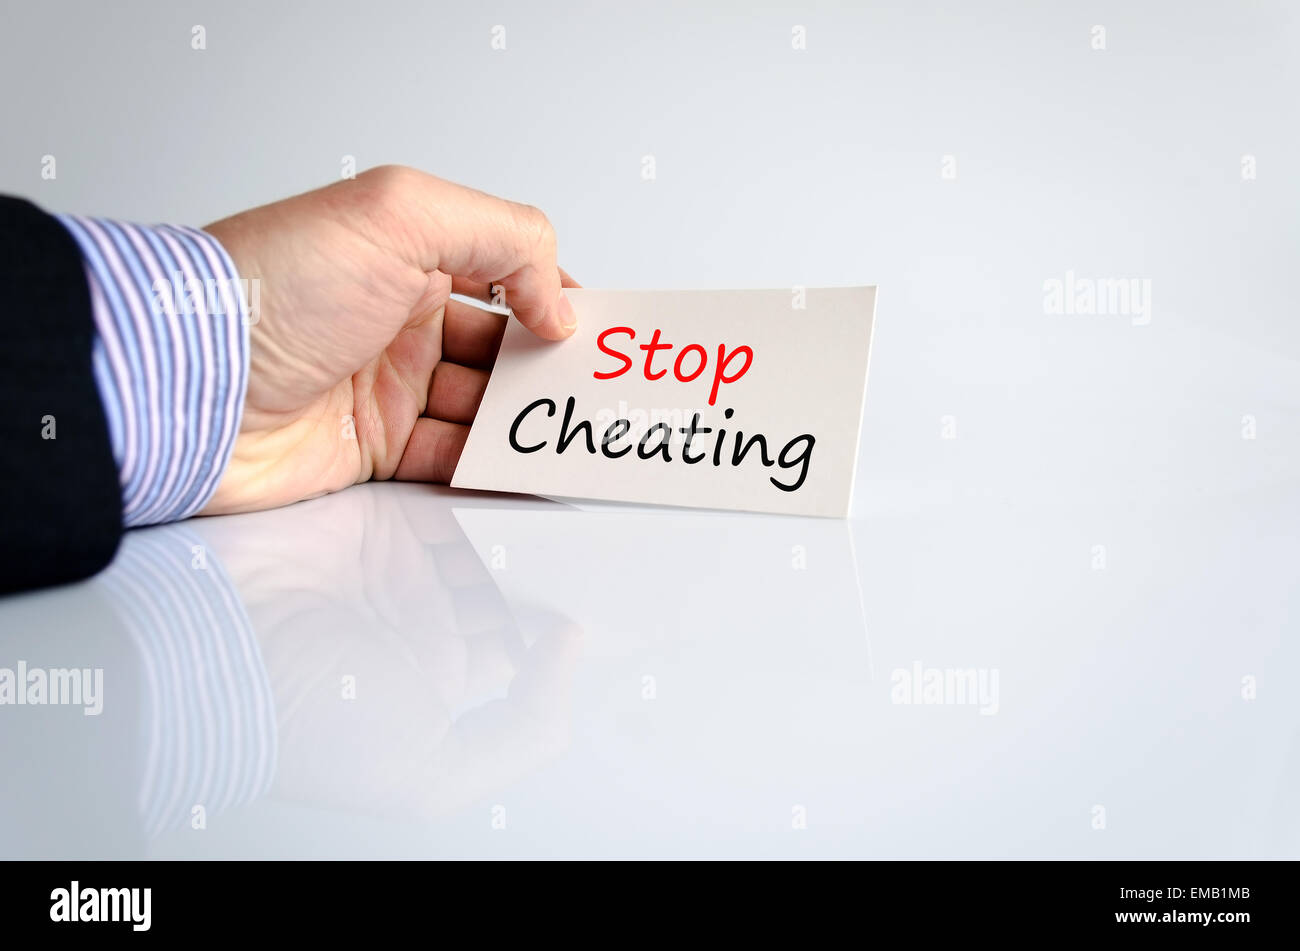 Stop Cheating Concept Isolated Over White Background Stock Photo